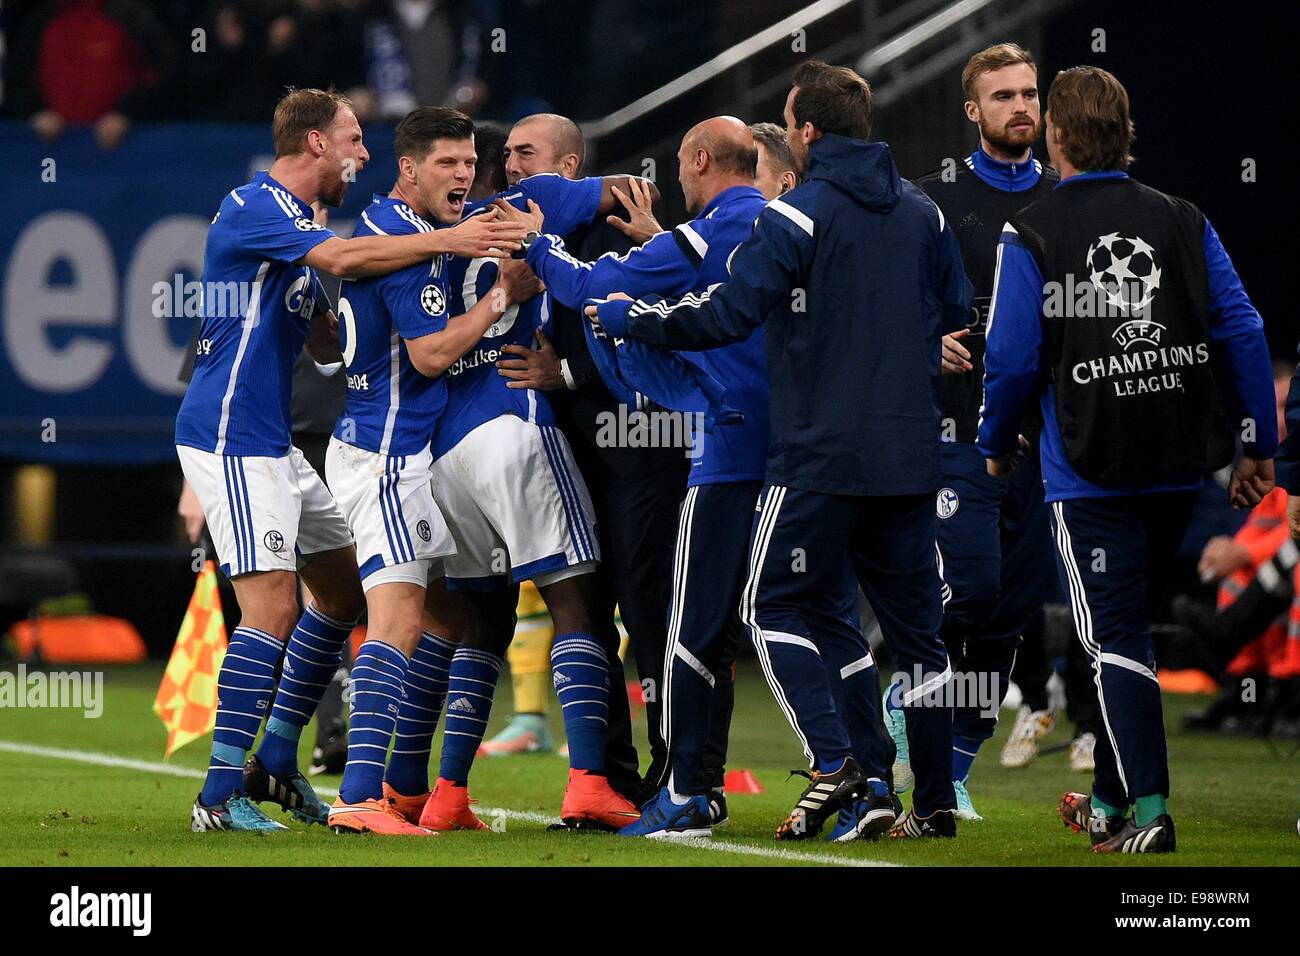 Gelsenkirchen, Germany. 21st Oct, 2014. Schalke's Benedikt Hoewedes (l-r), Klaas-Jan Huntelaar, Chinedu Obasi and coach Roberto di Matteo cheer after the 1-1 equalizer during the Champions League Group G match between FC Schalke 04 and Sporting Lissabon in Gelsenkirchen, Germany, 21 October 2014. Credit:  dpa picture alliance/Alamy Live News Stock Photo